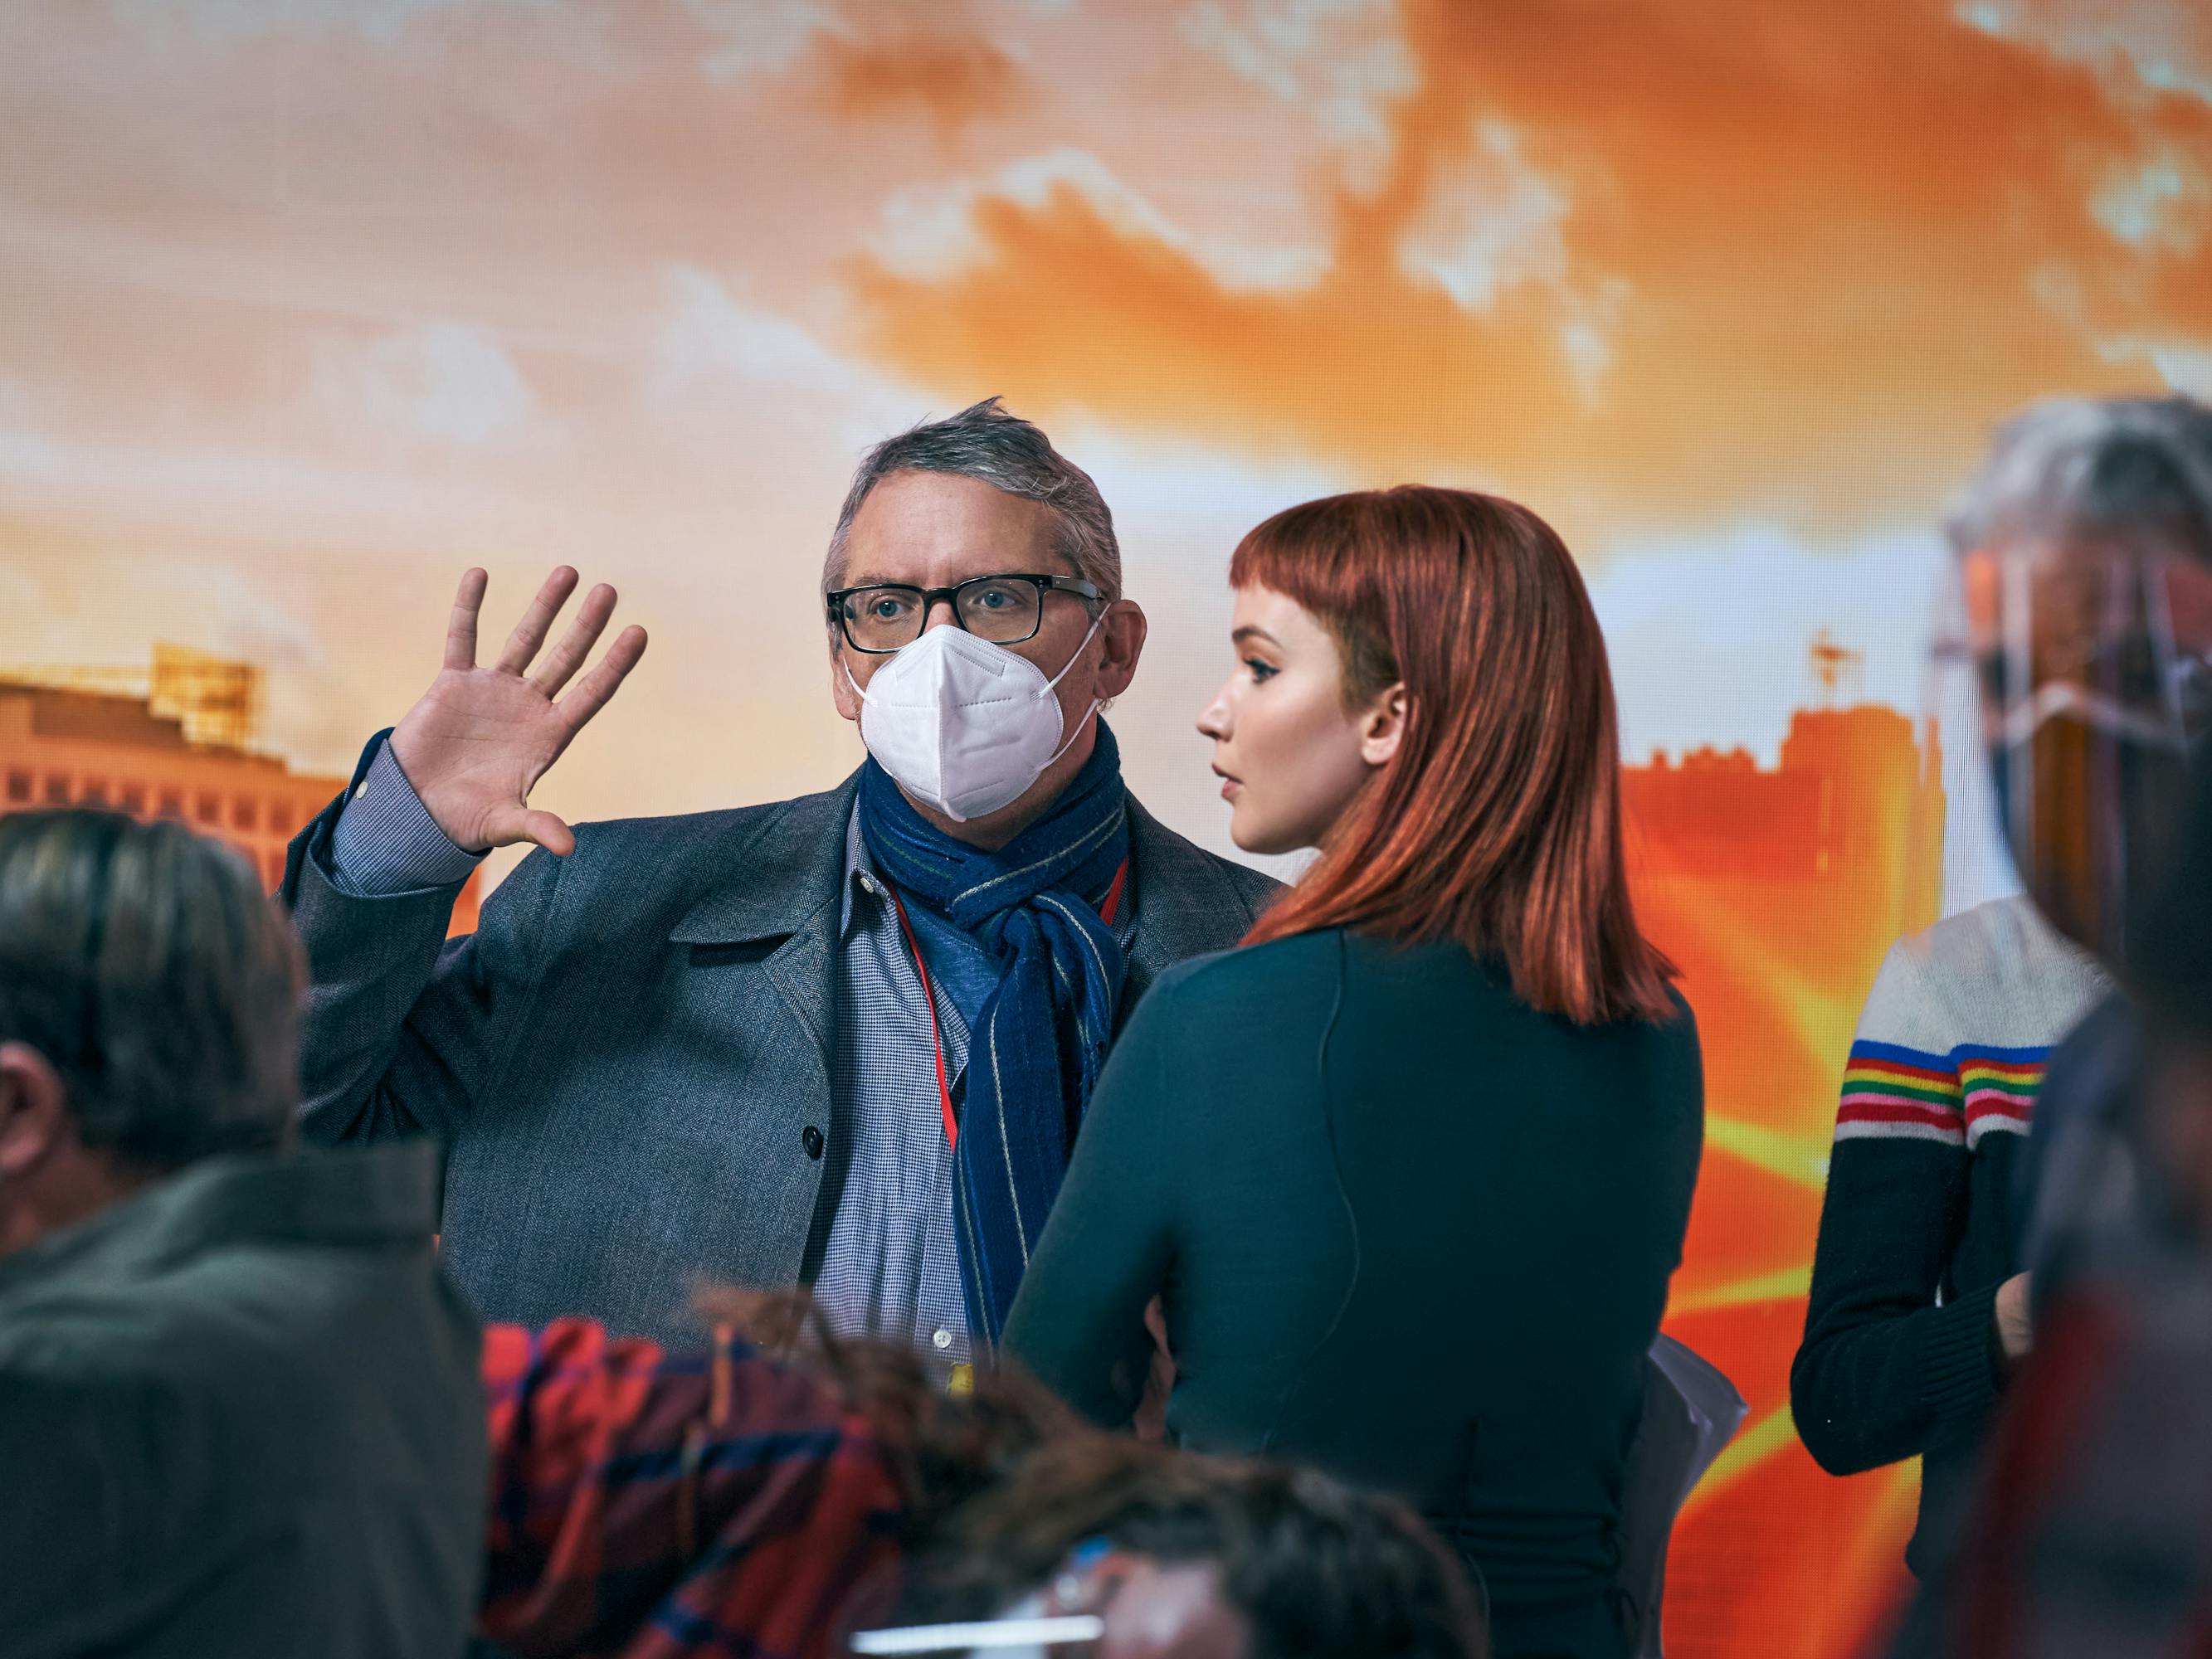 Adam McKay and Jennifer Lawrence stand together on set. McKay wears a blazer, scarf, and mask. Lawrence wears her Kate Dibiasky wig and grey turtleneck. Don't Look Up crew mingle in PPE.